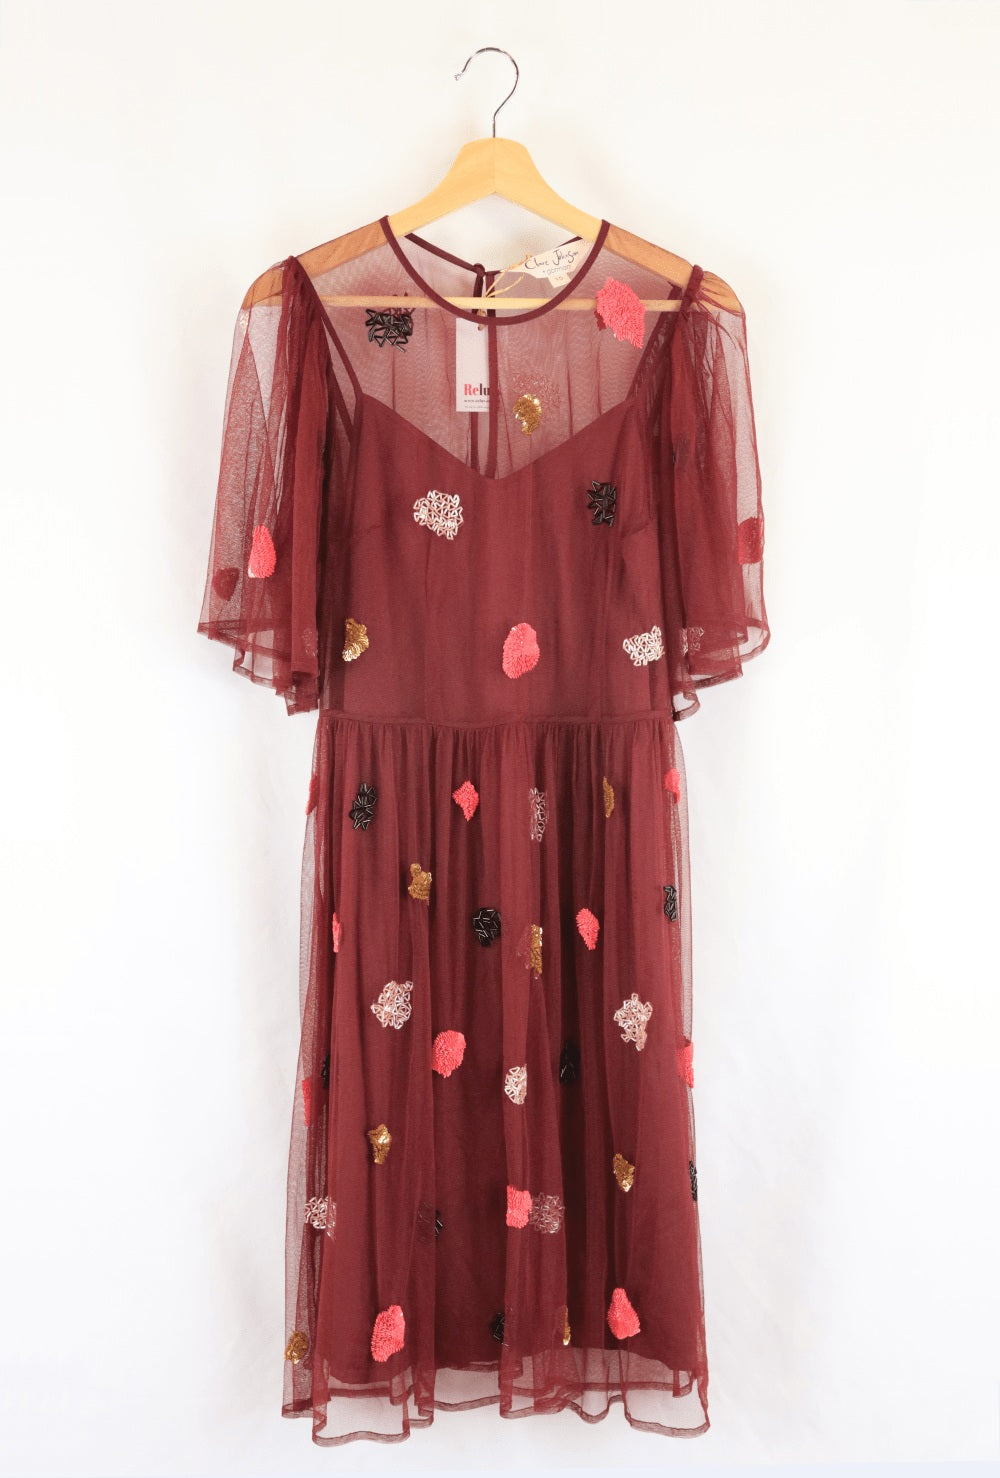 Claire Johnson X Gorman Sheer Red Dress With Beads 10